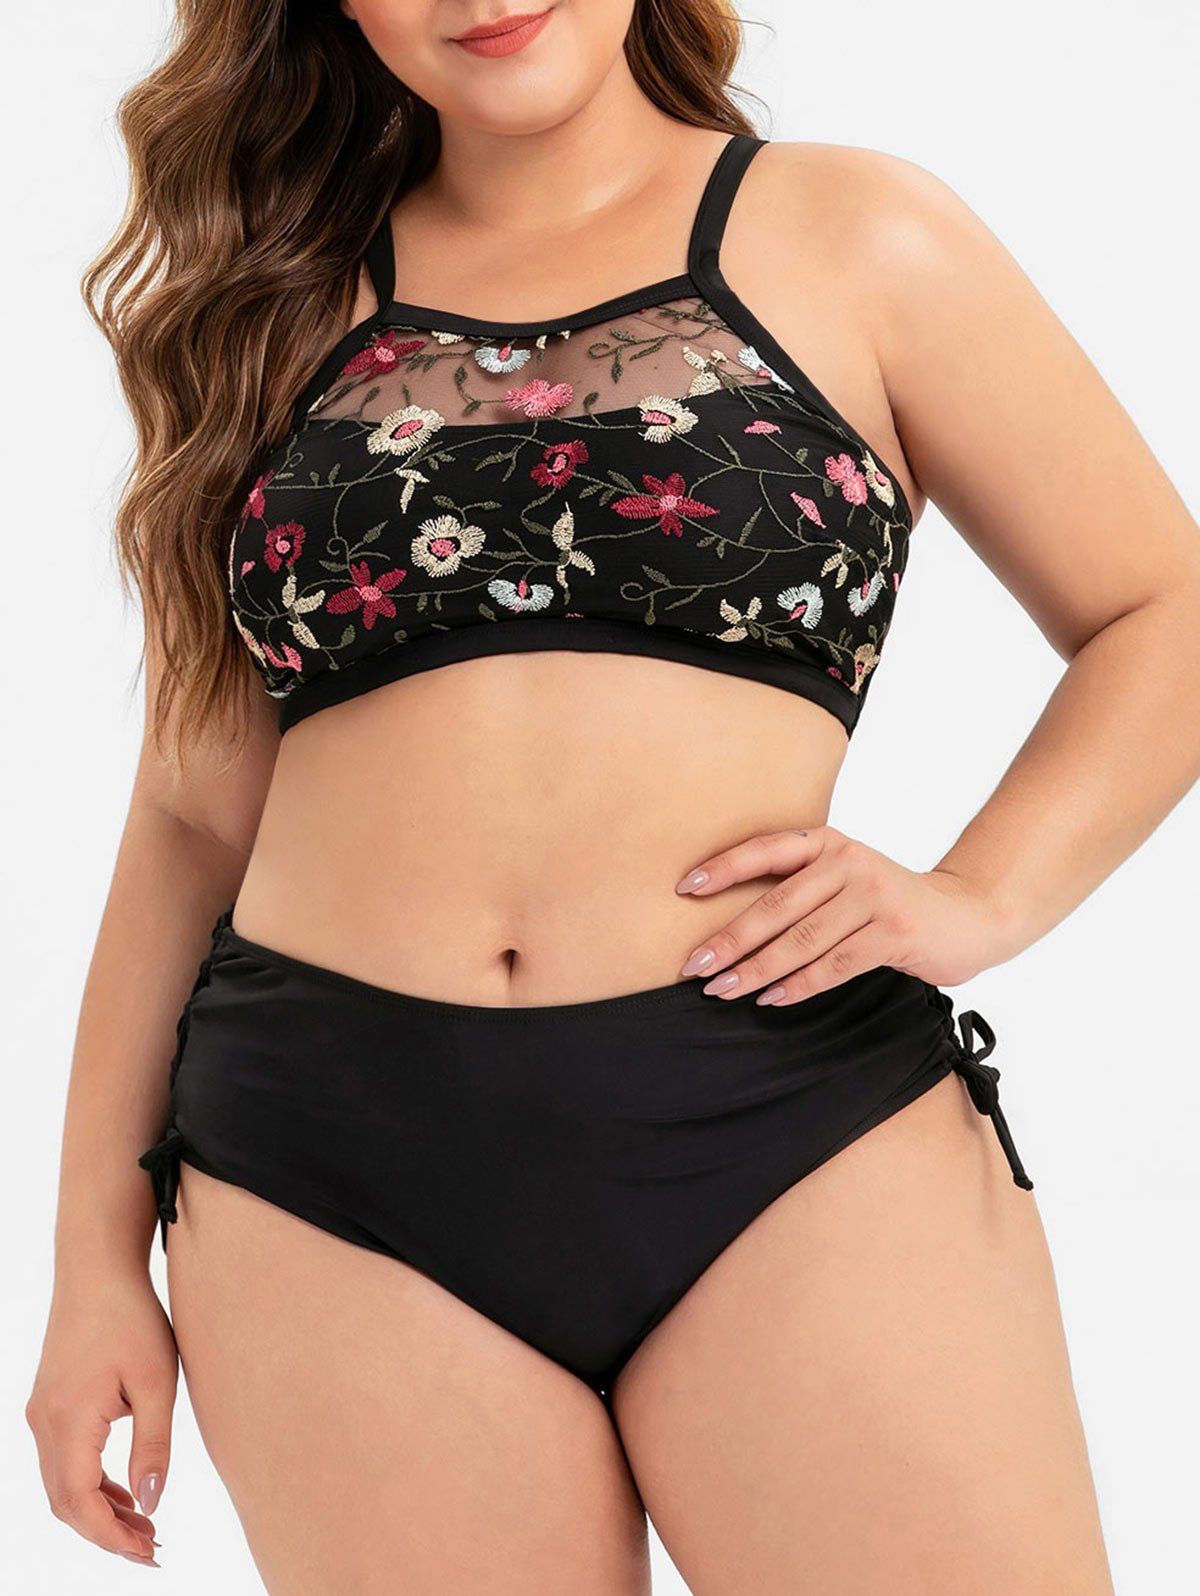 Floral Embroidered Mesh Overlay Lace-up Plus Size Bikini Swimsuit - BLACK 4X